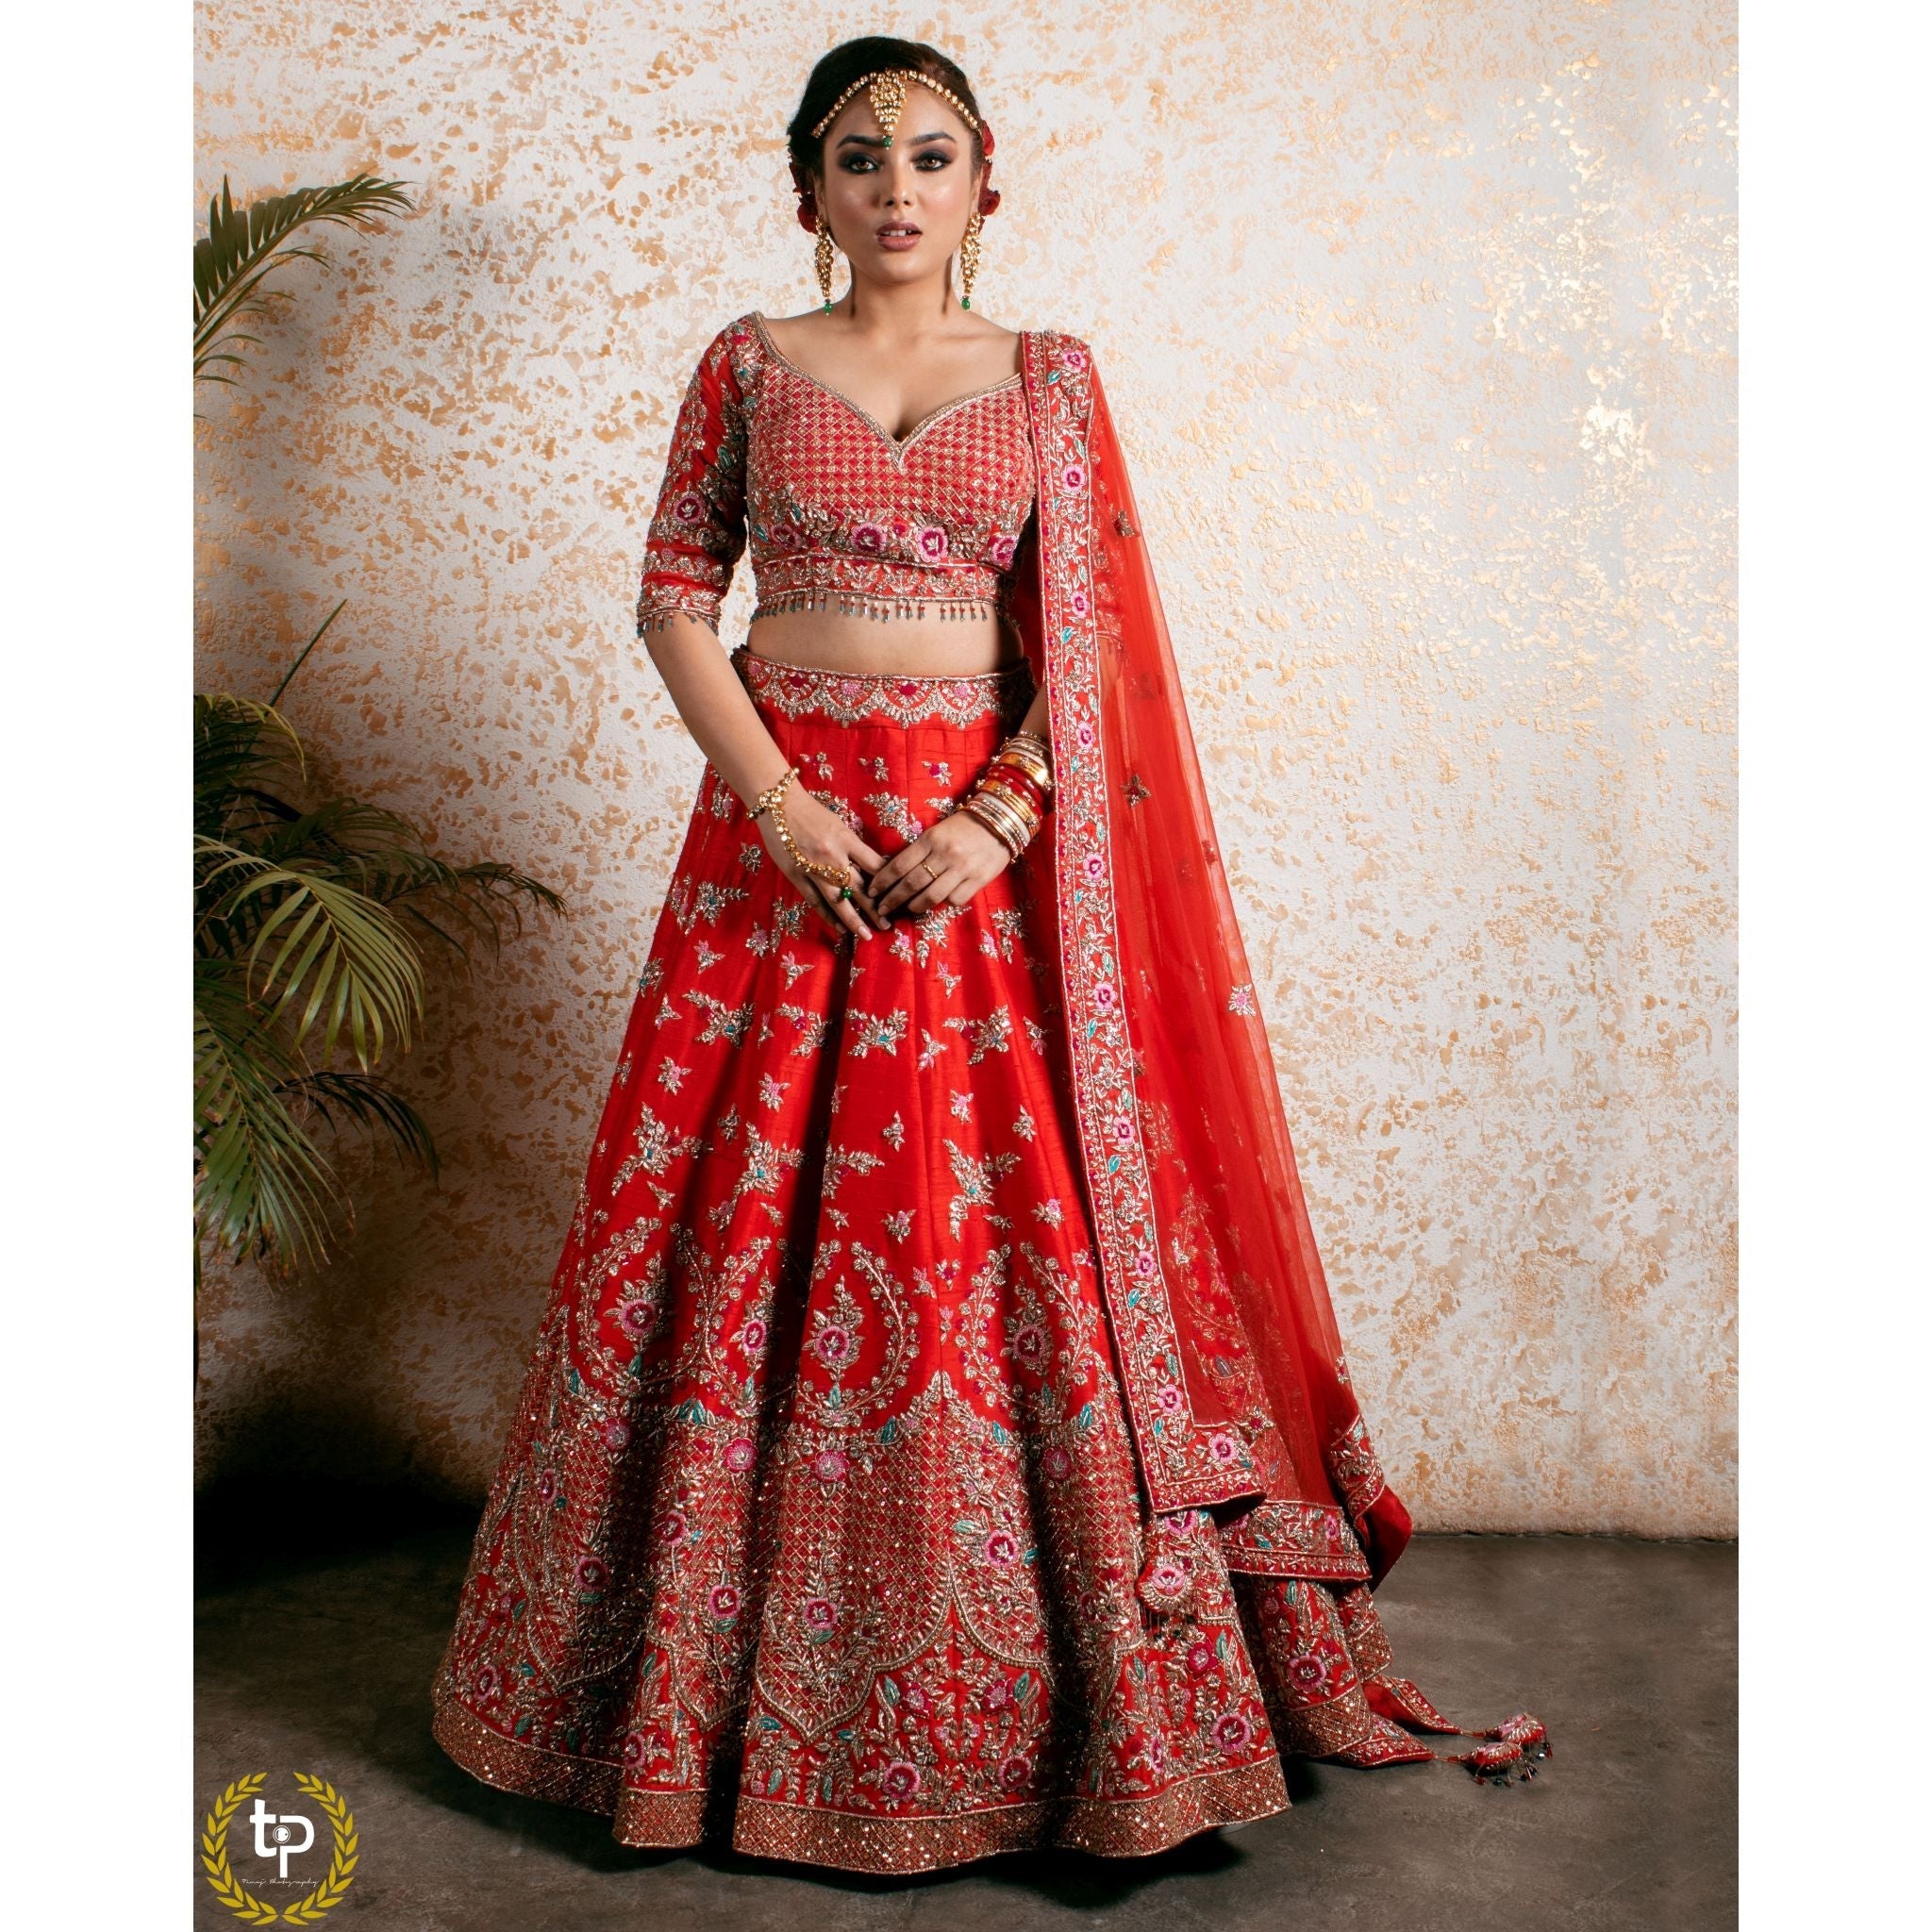 Vermillion Red Abstract Red Lehenga Set - Indian Designer Bridal Wedding Outfit